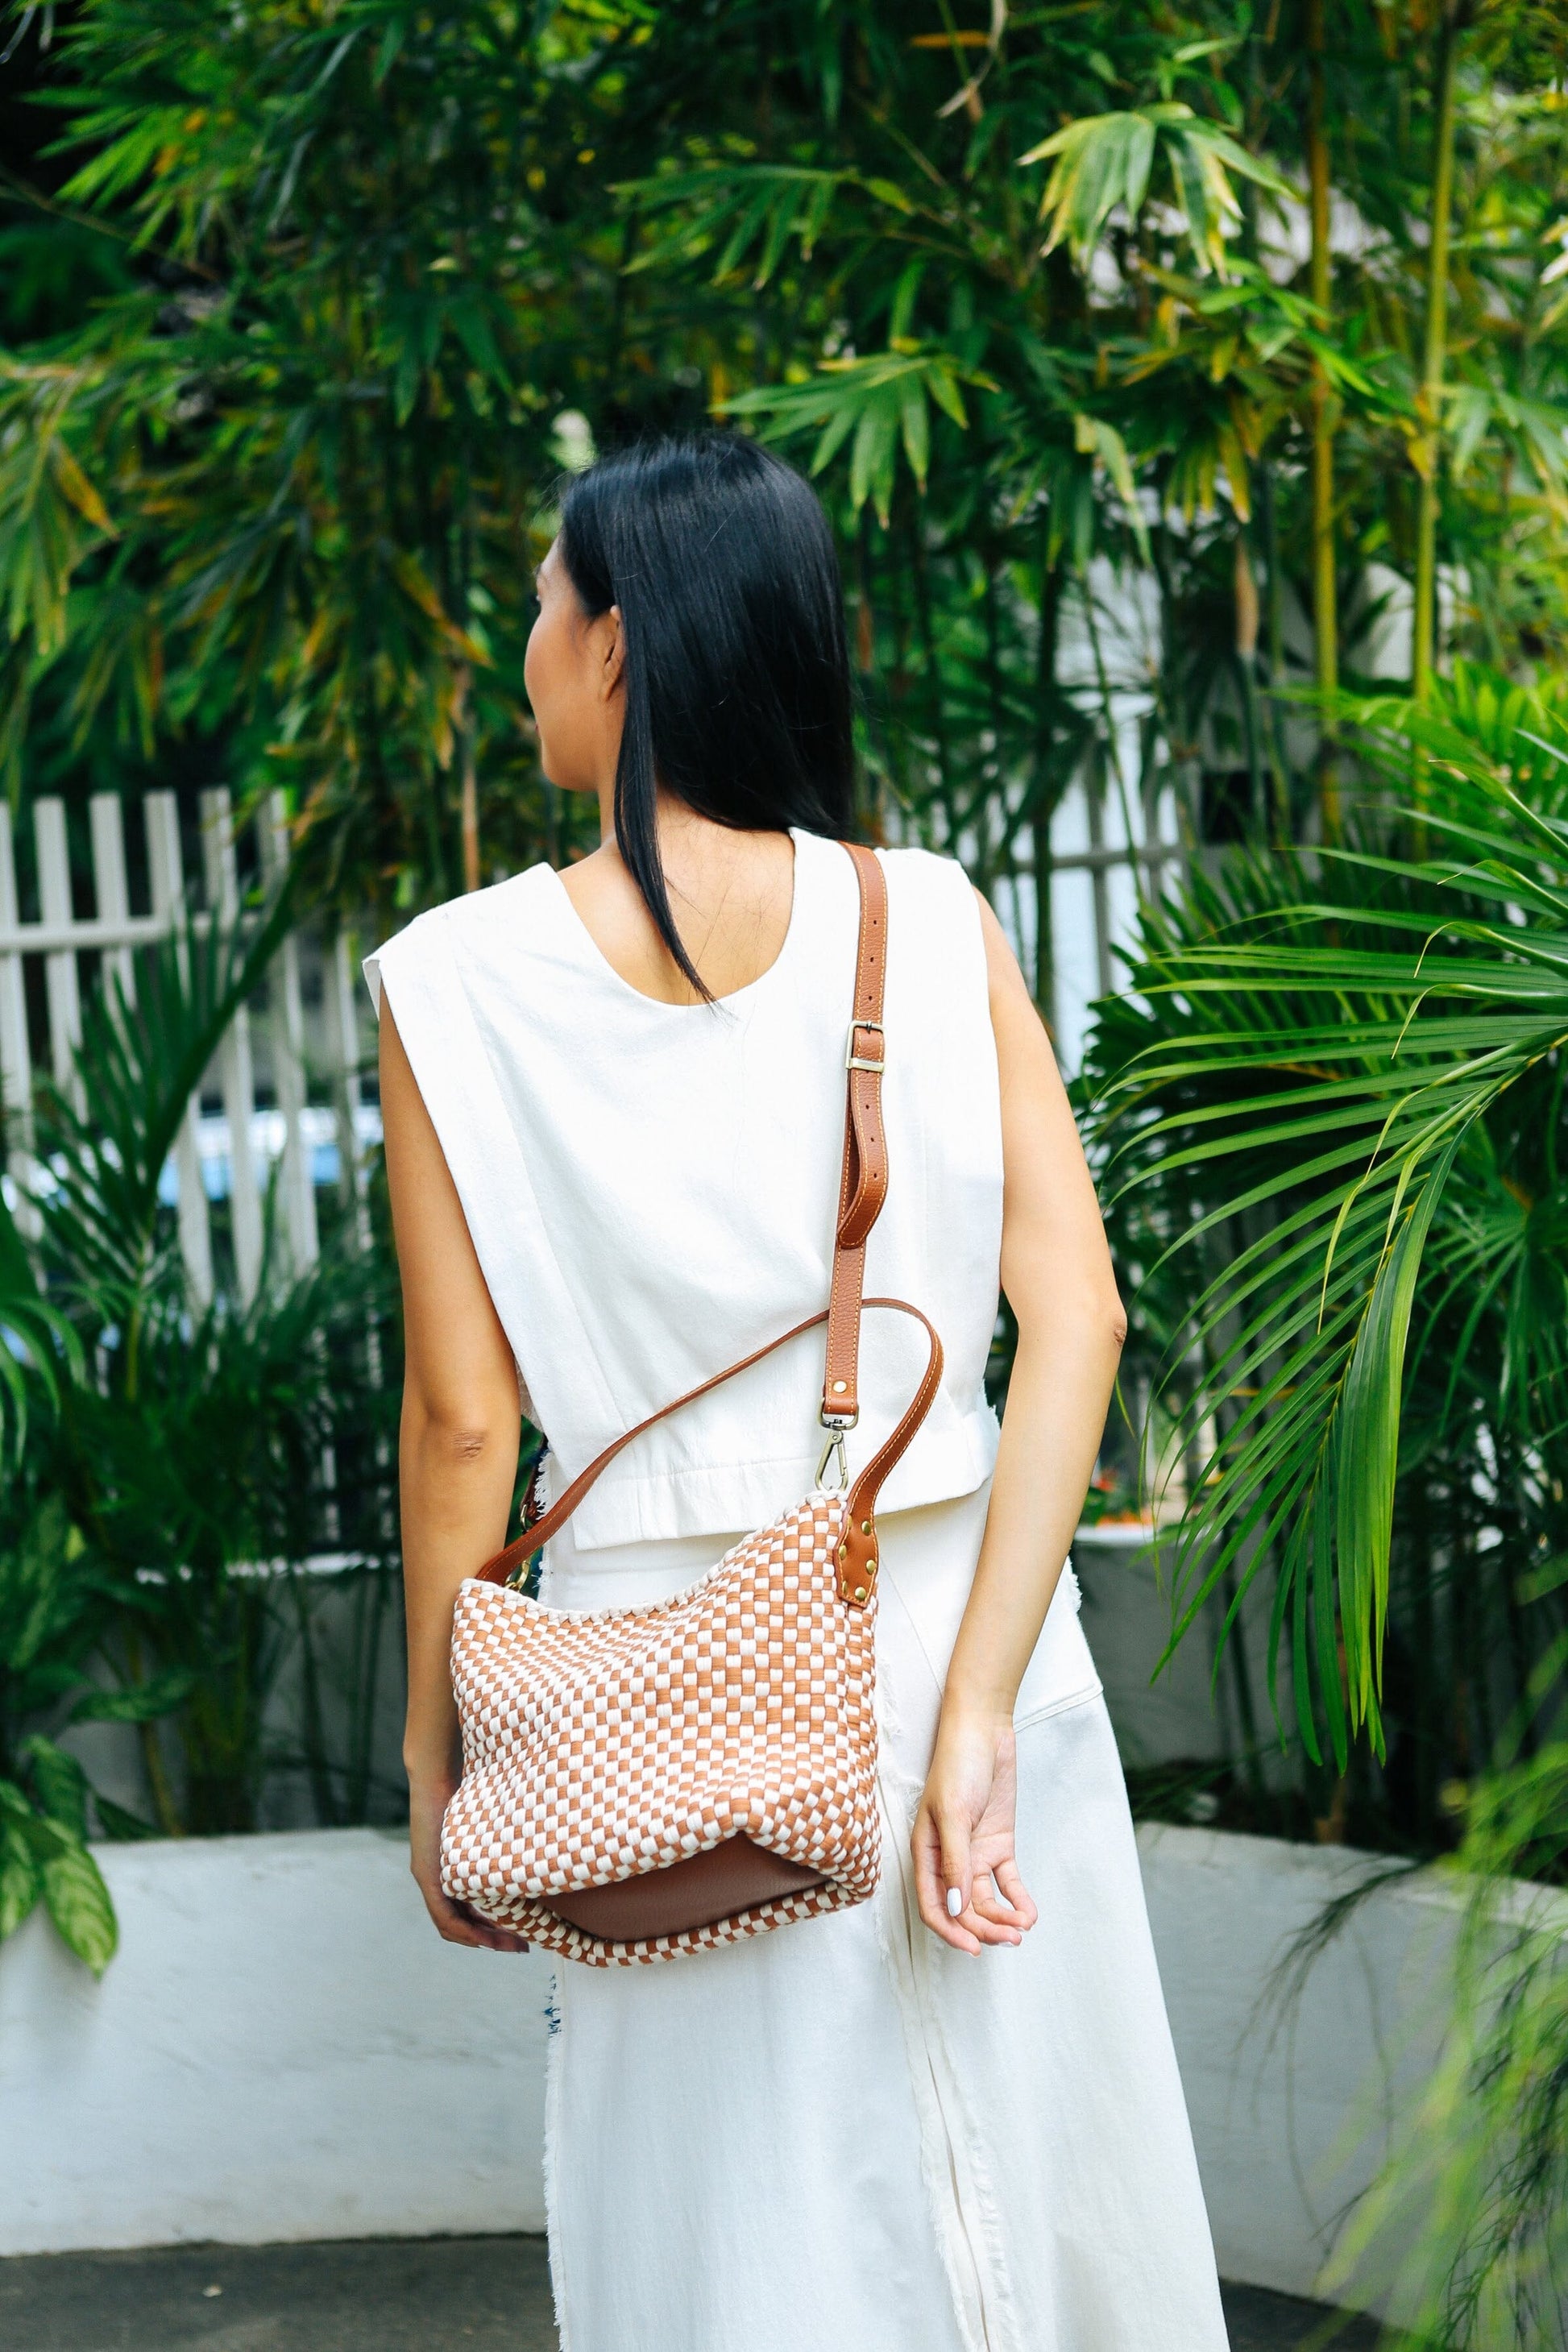 [Ready Today] Buslo Mini Checkerboard Tan & Beige with Longer Handle Fashion Rags2Riches